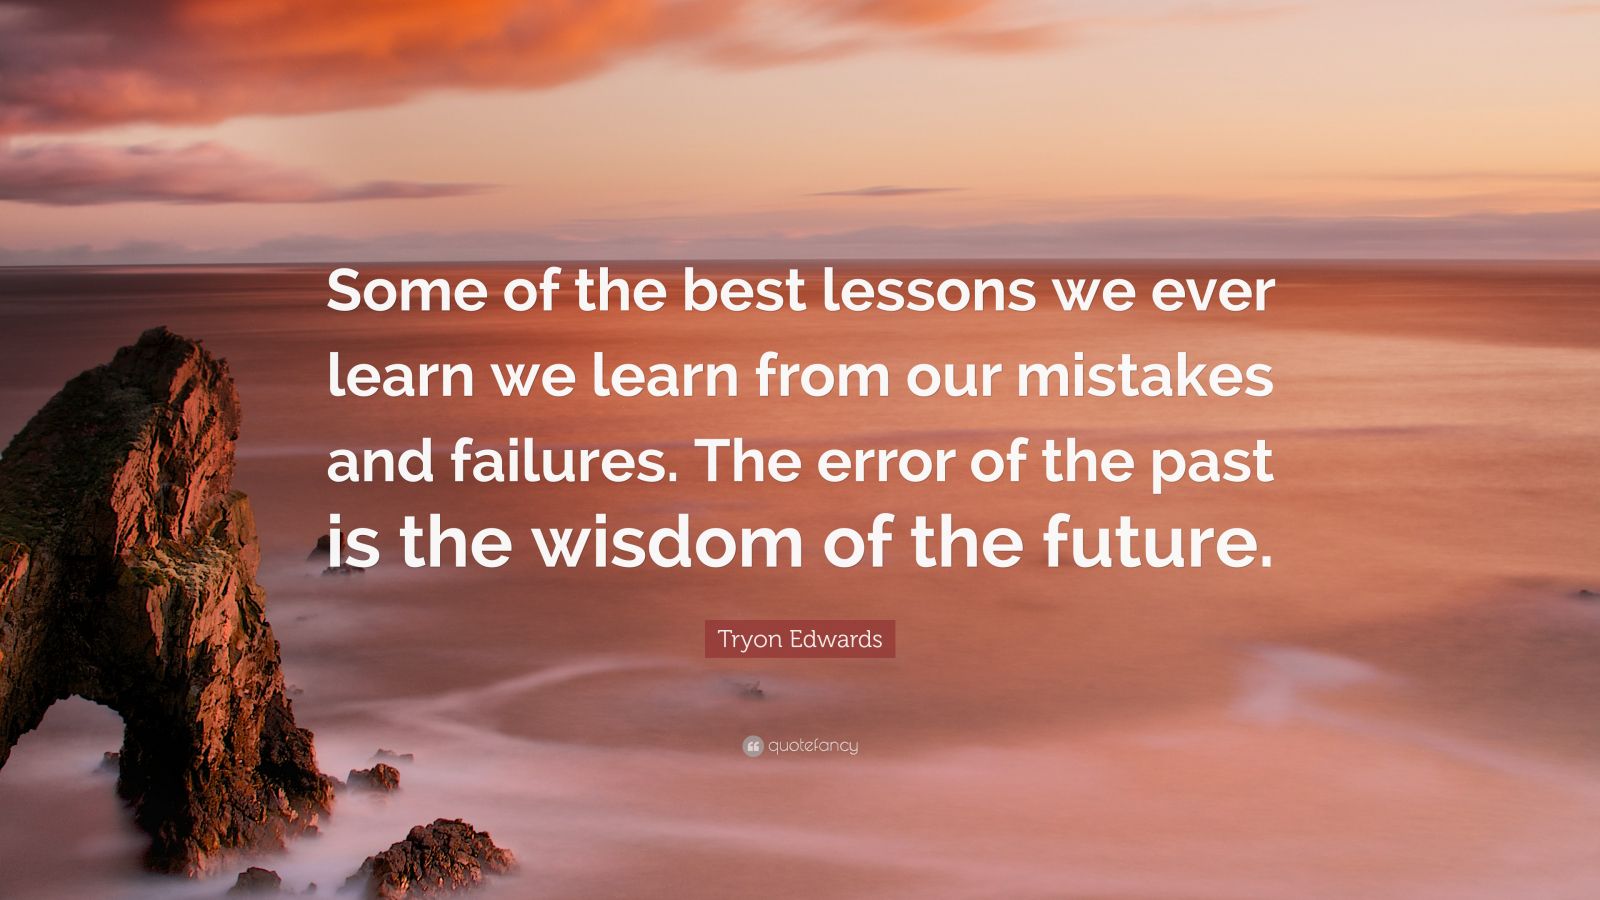 Tryon Edwards Quote: “Some of the best lessons we ever learn we learn